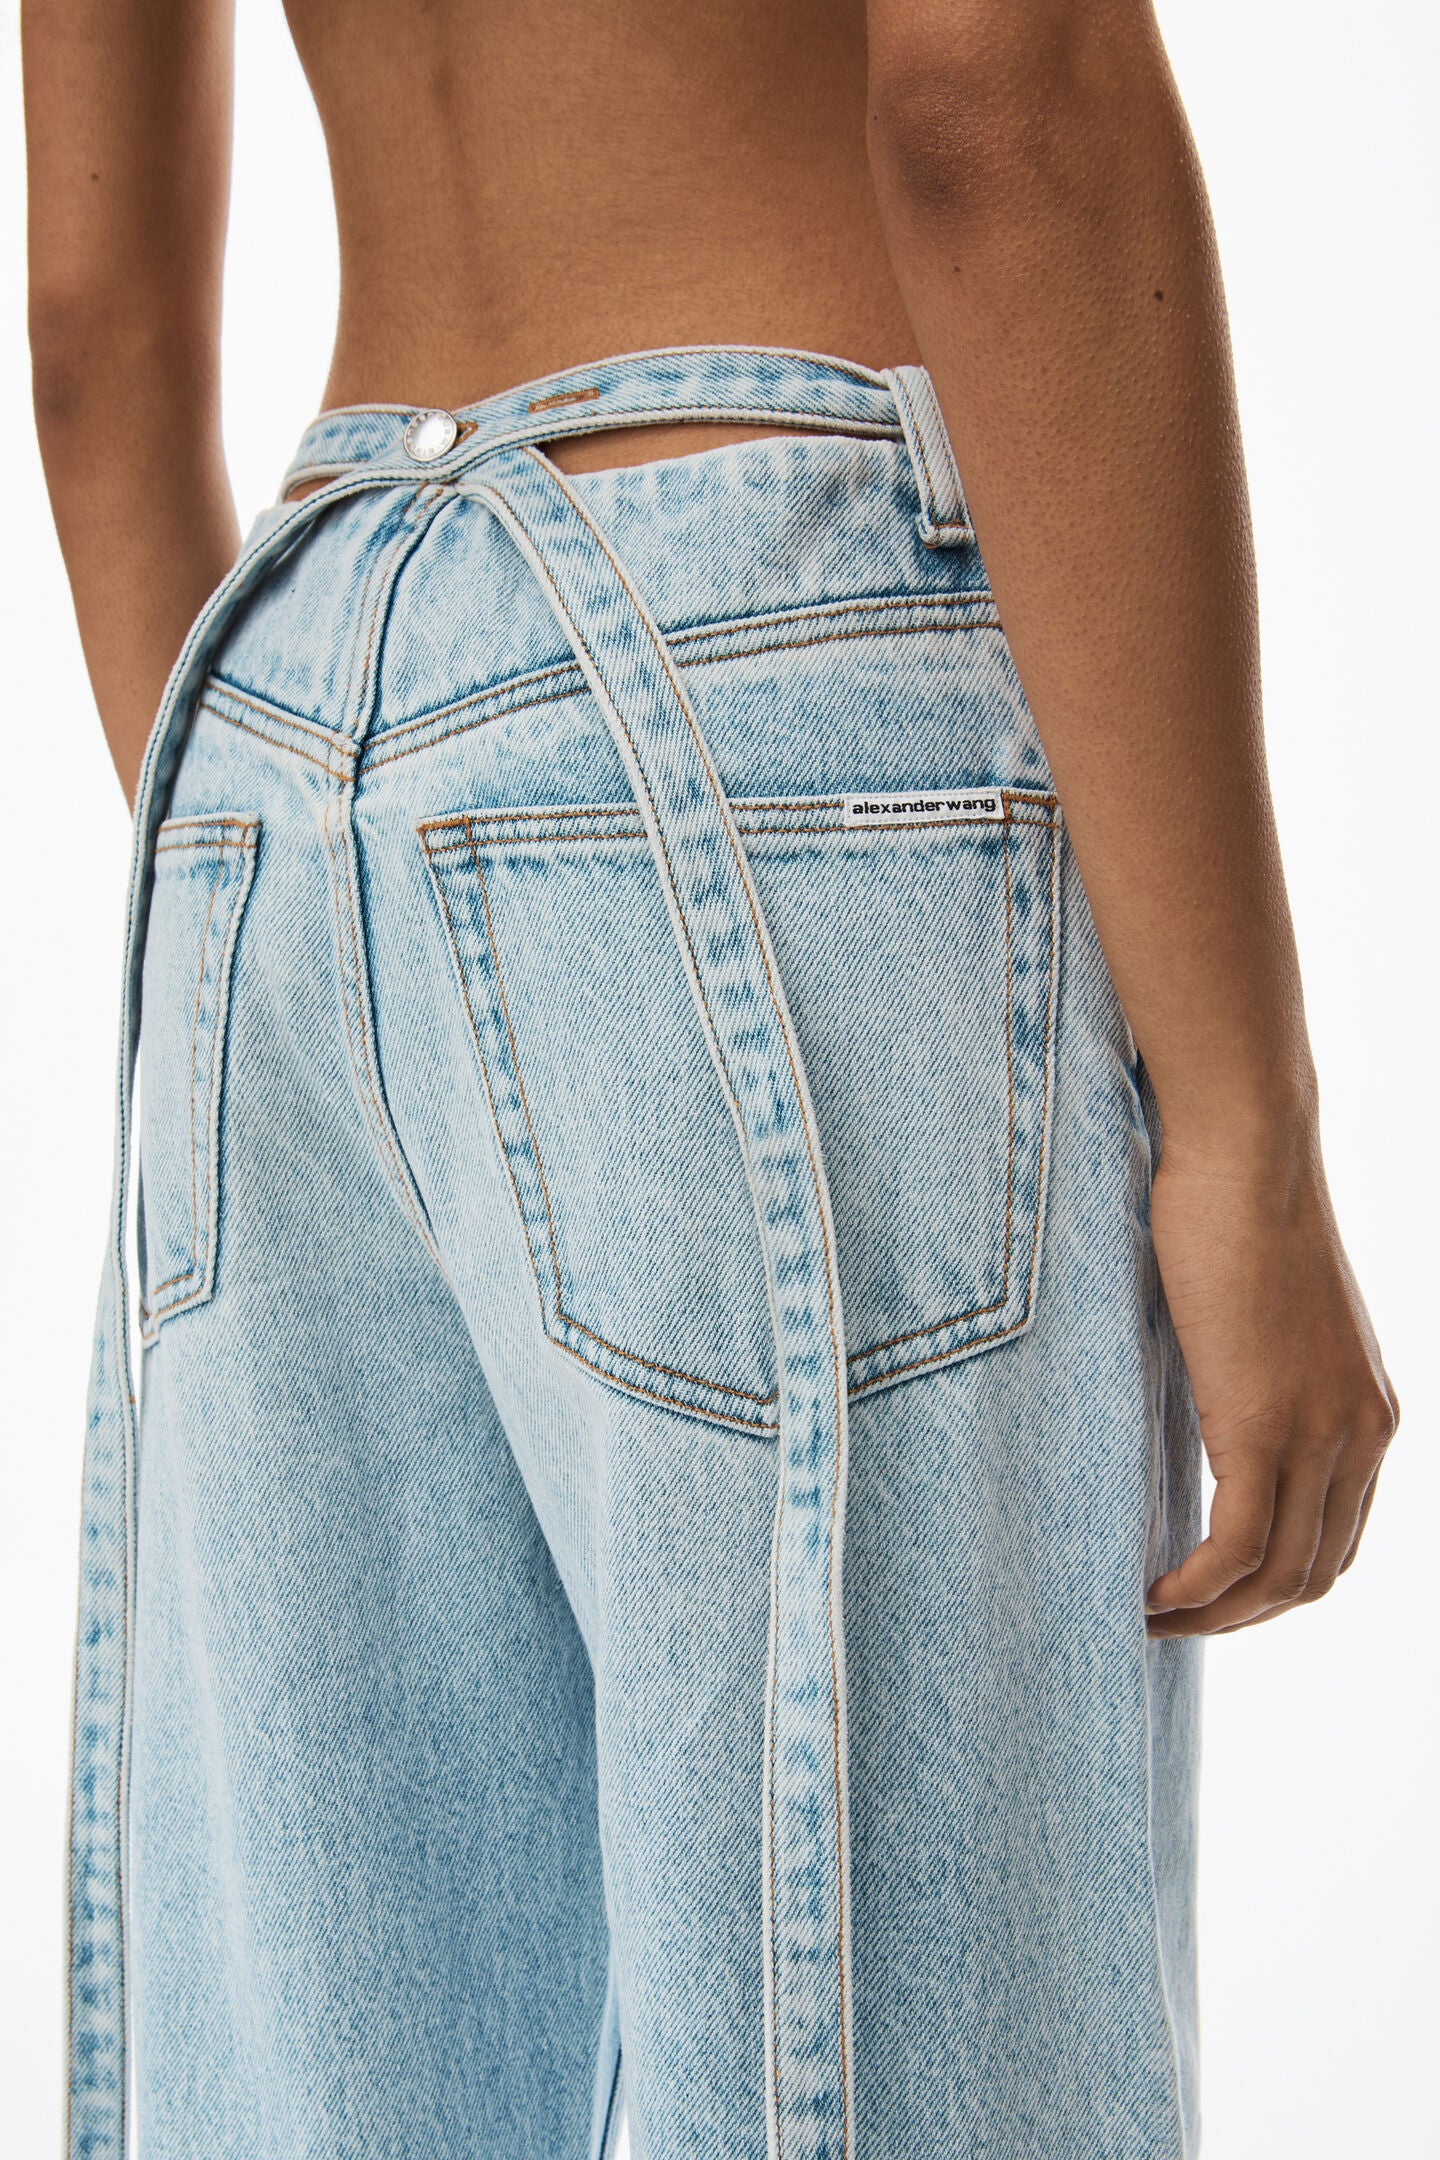 The Alexander Wang Balloon Jean With Skinny Button Back Waistband in Bleach available at The New Trend Australia